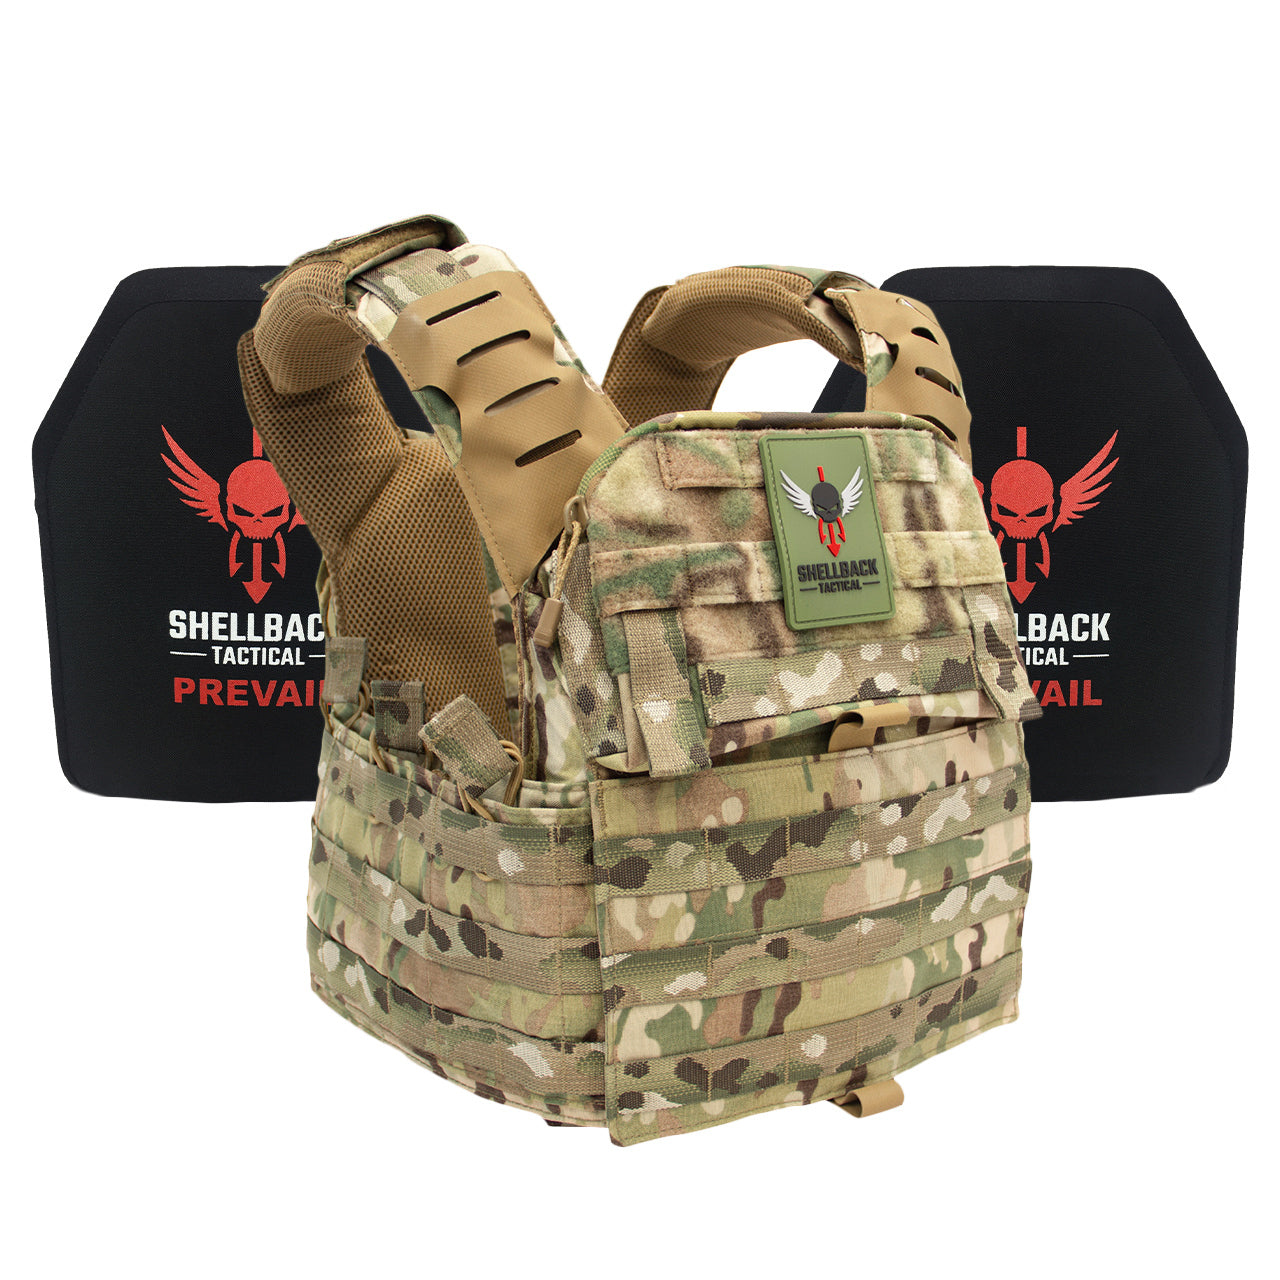 A Shellback Tactical Banshee Elite 2.0 Active Shooter Kit with Level III Single Curve 10 x 12 Hard Armor plate carrier with a plate and a pair of pads.